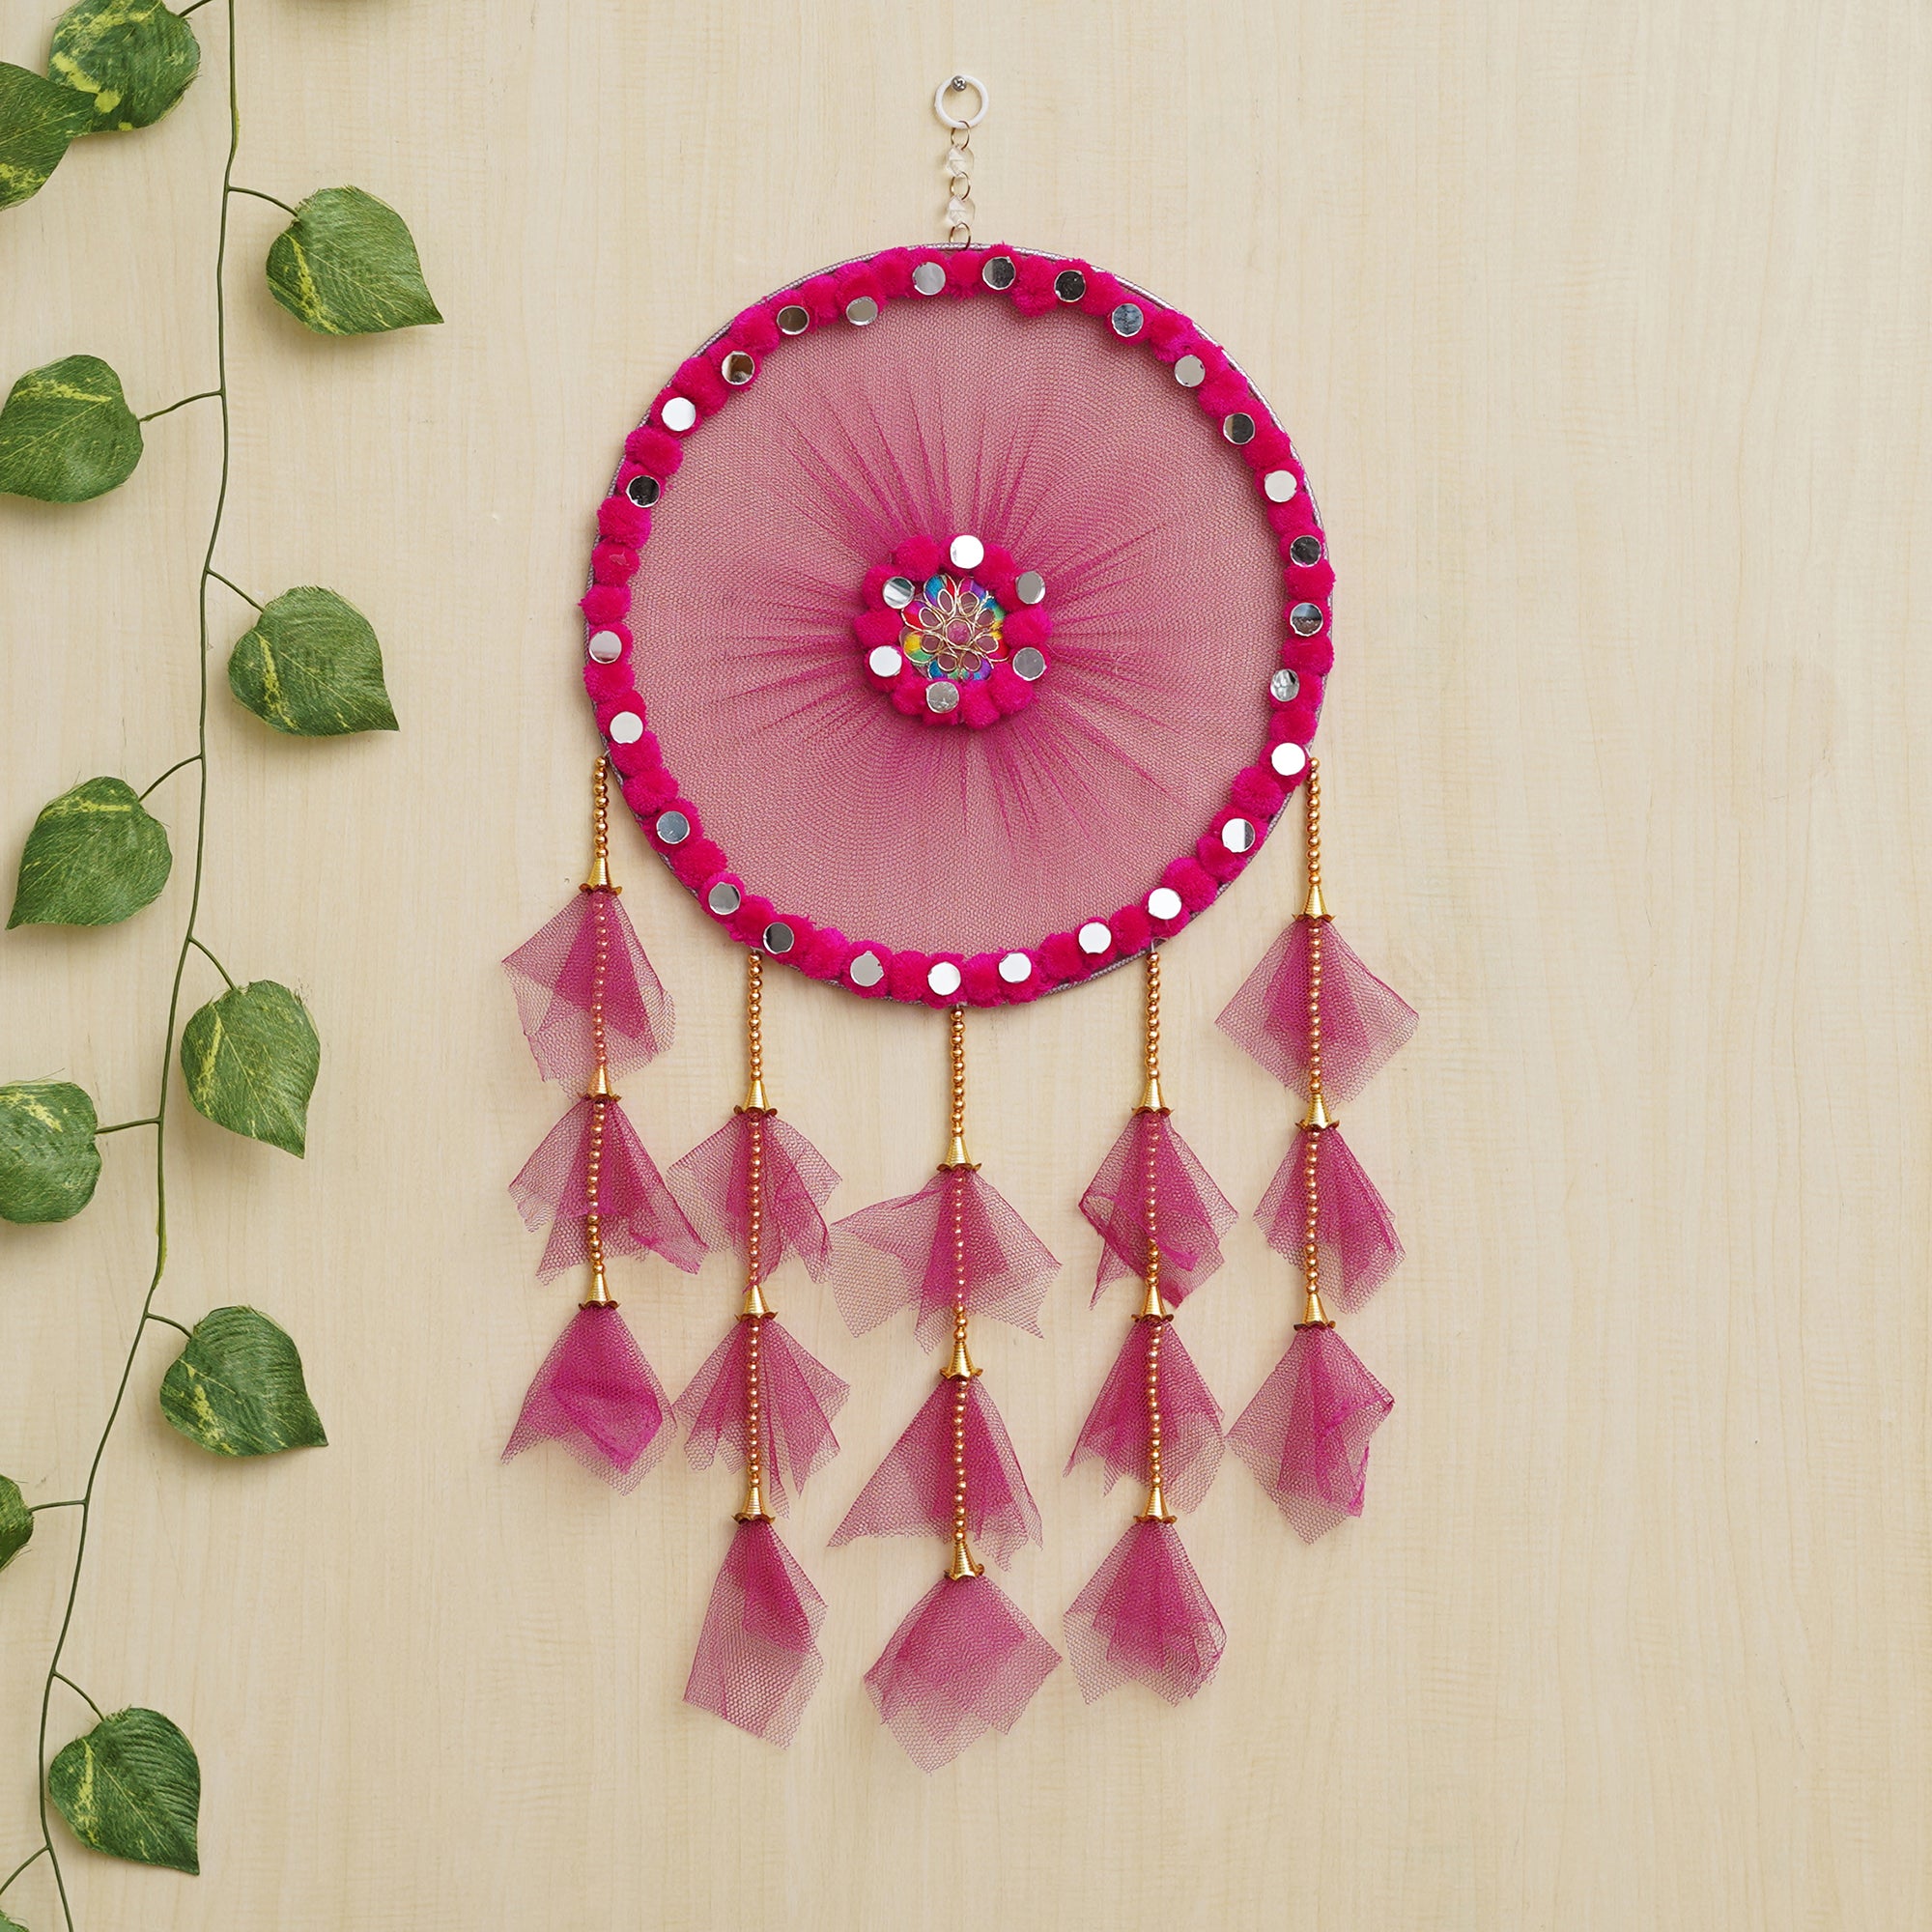 eCraftIndia Pink Wall Hanging Dream Catcher For Home Decor - Perfect Window, Bedroom, Living Room, Wall Decoration Item 1